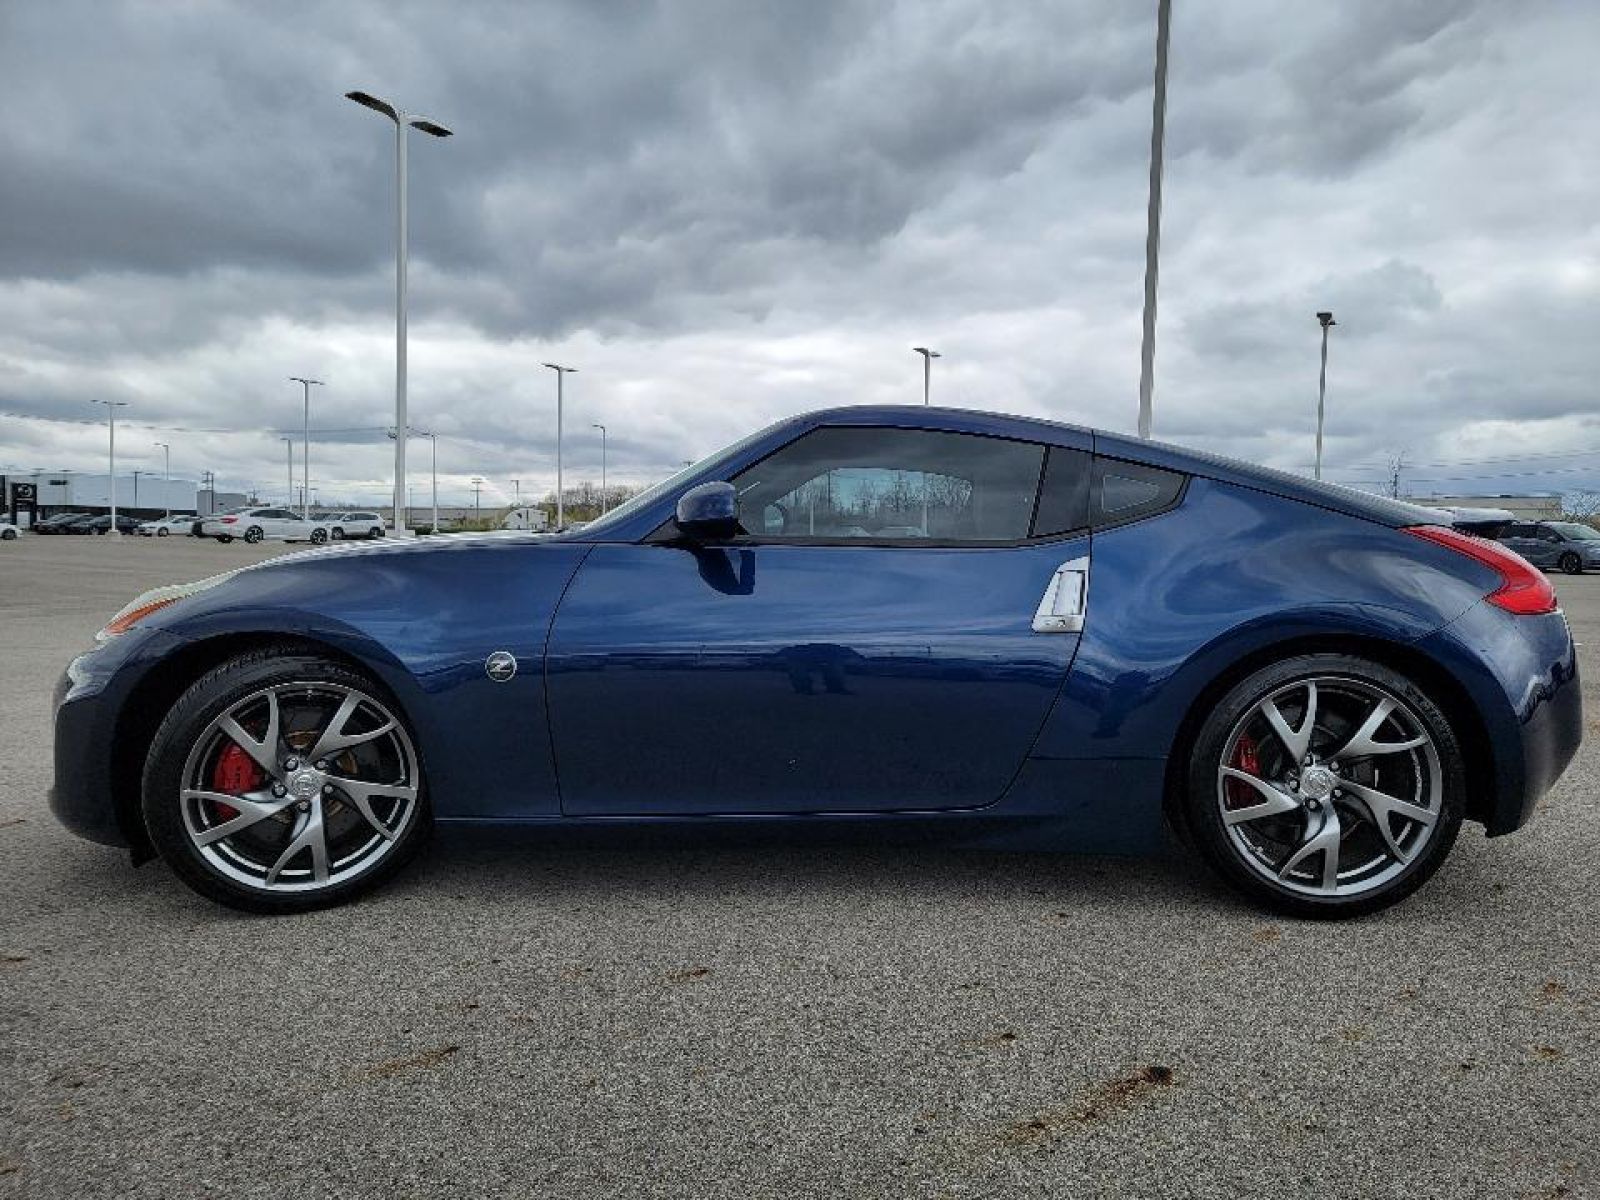 Used, 2014 Nissan 370Z Touring, Other, P0512-10